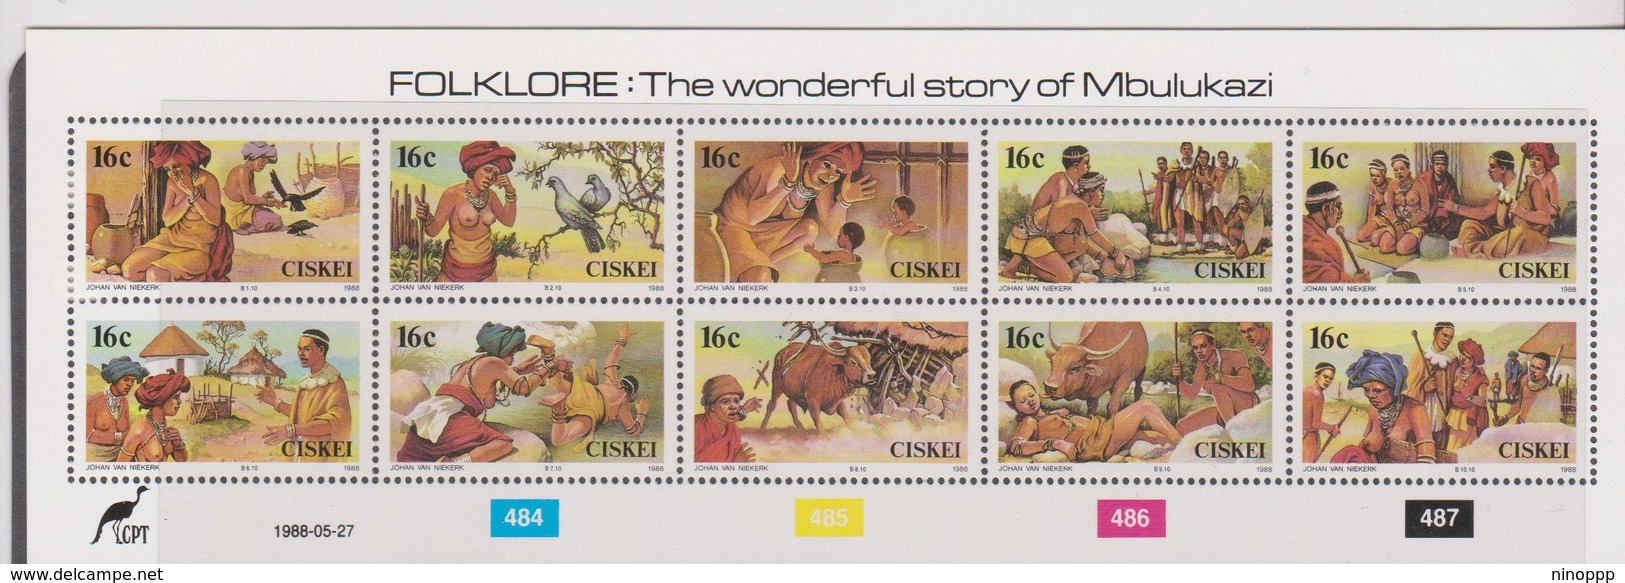 South Africa Ciskei Scott 122 1988  Folklore Sheetlet,mint Never Hinged - Used Stamps